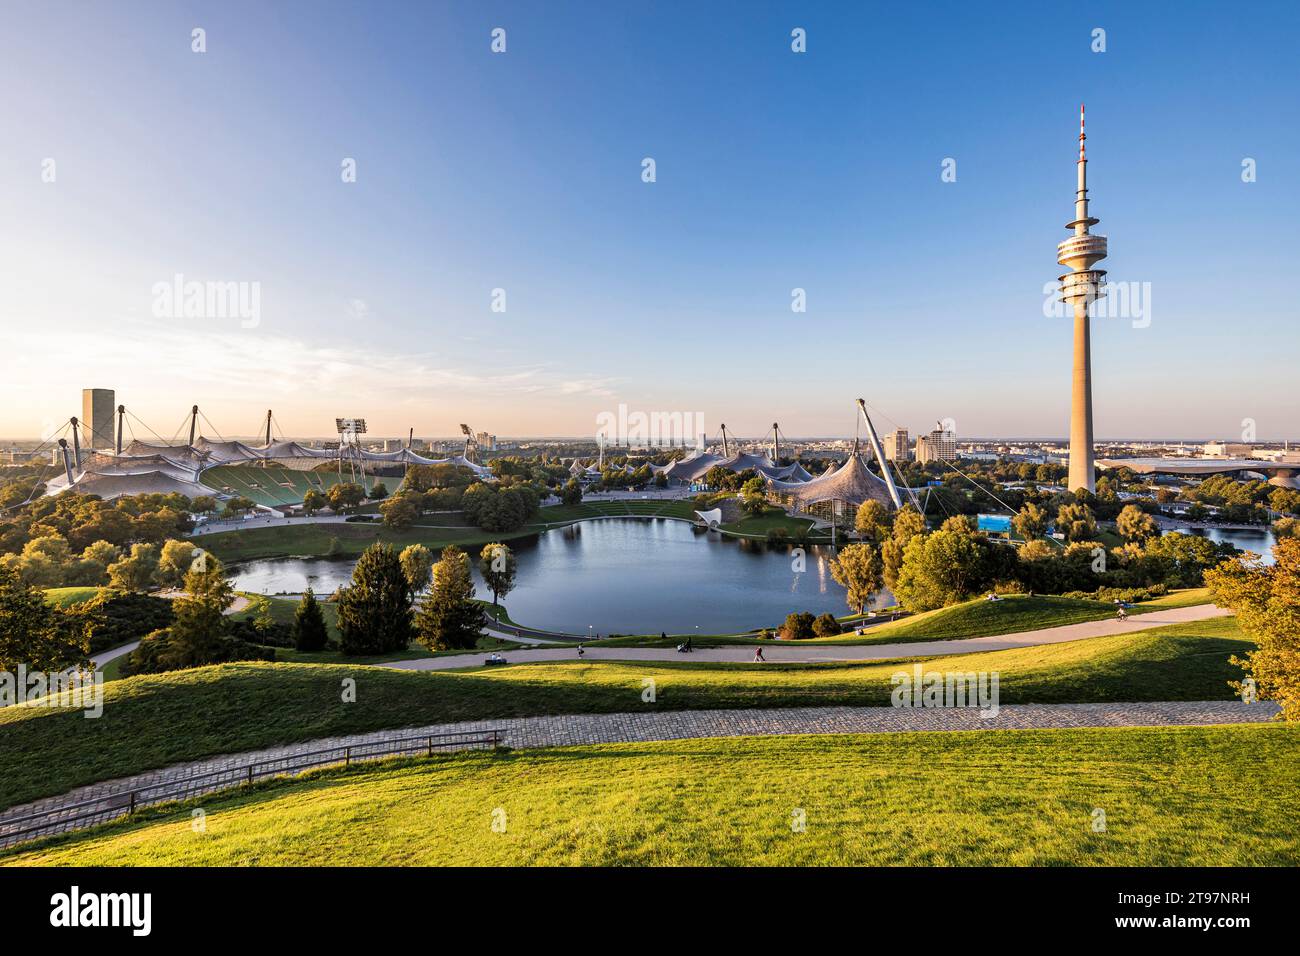 Germany, Bavaria, Munich, Olympic Park at dusk with Olympic Tower, BMW Building and pond in background Stock Photo